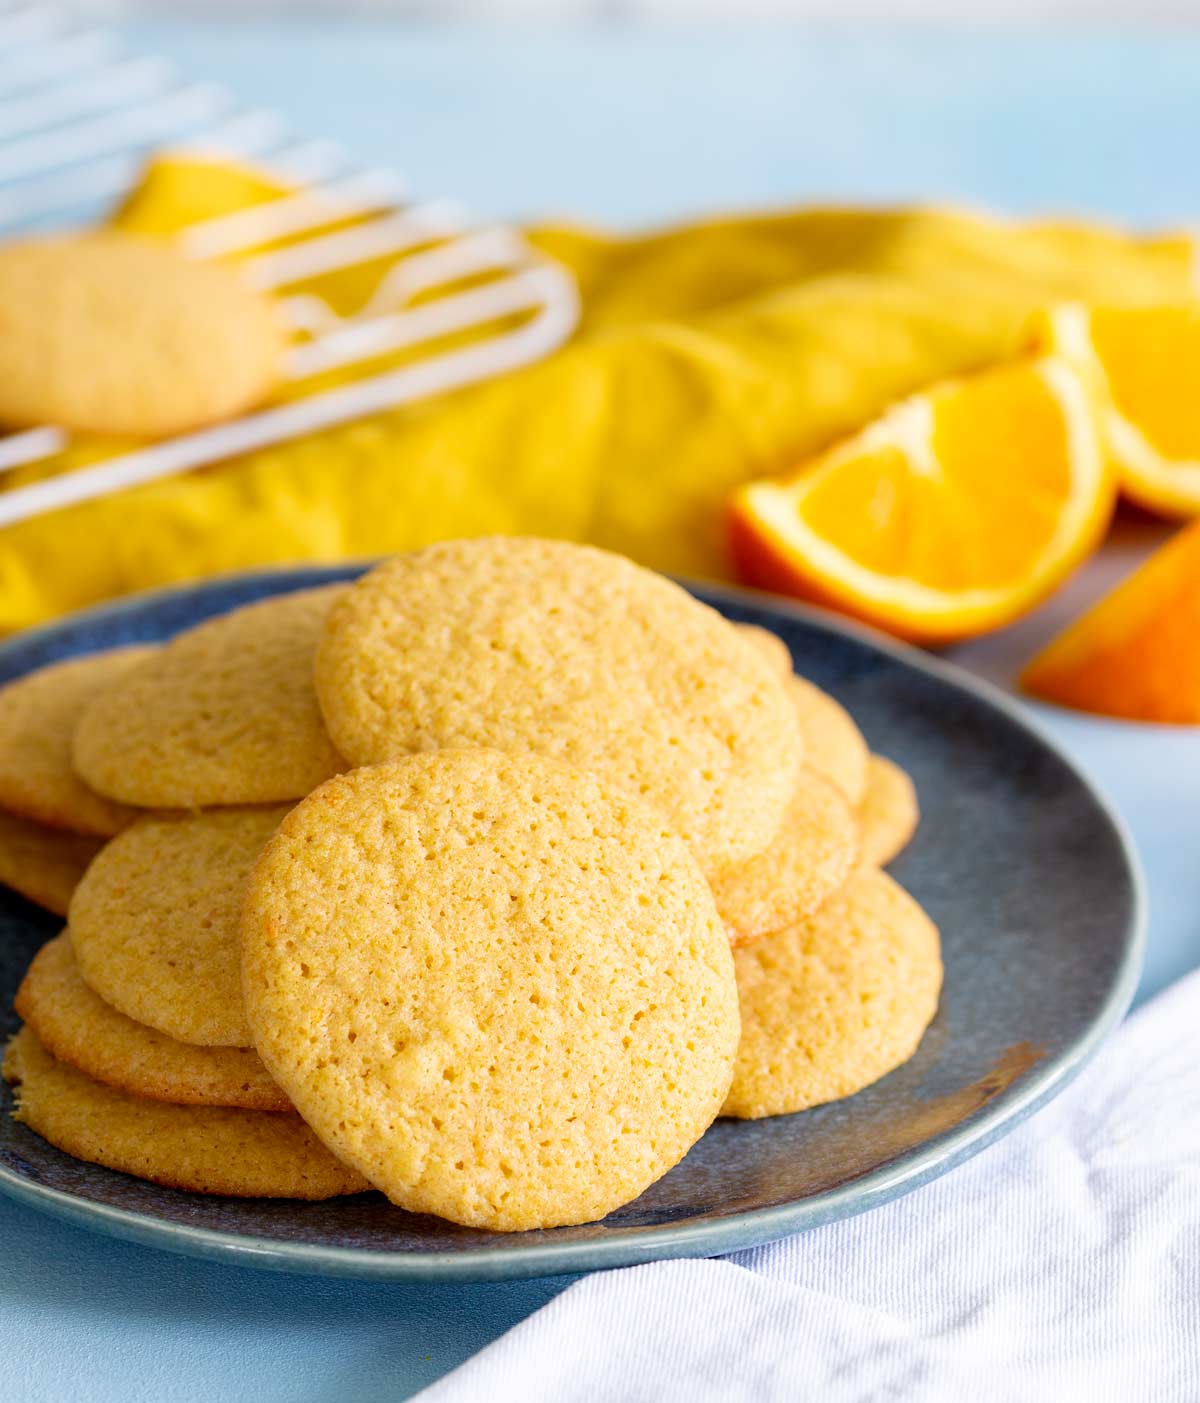 orange cookies stacked on a plate with a yellow napkin